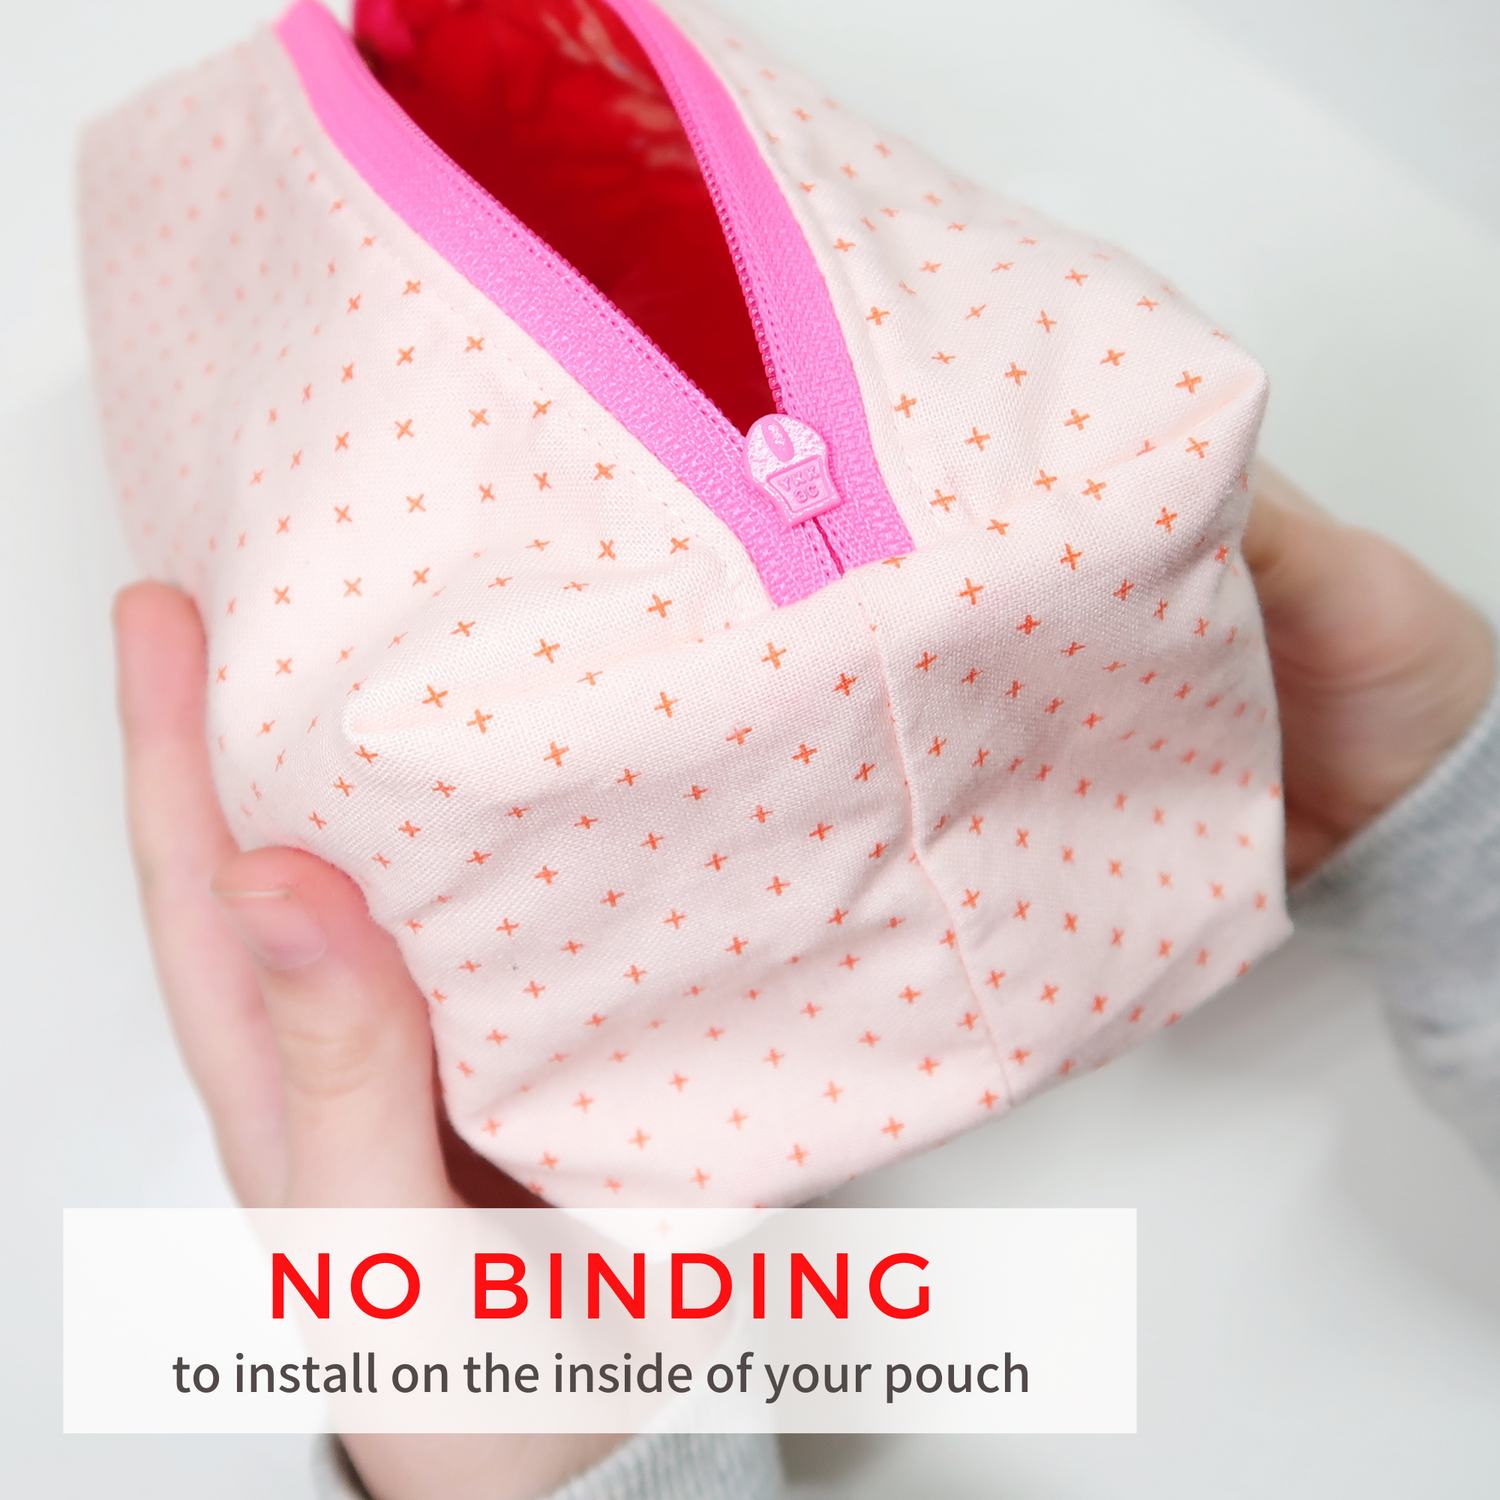 Easy to Sew Zippered Pouches! - Pink Polka Dot Creations